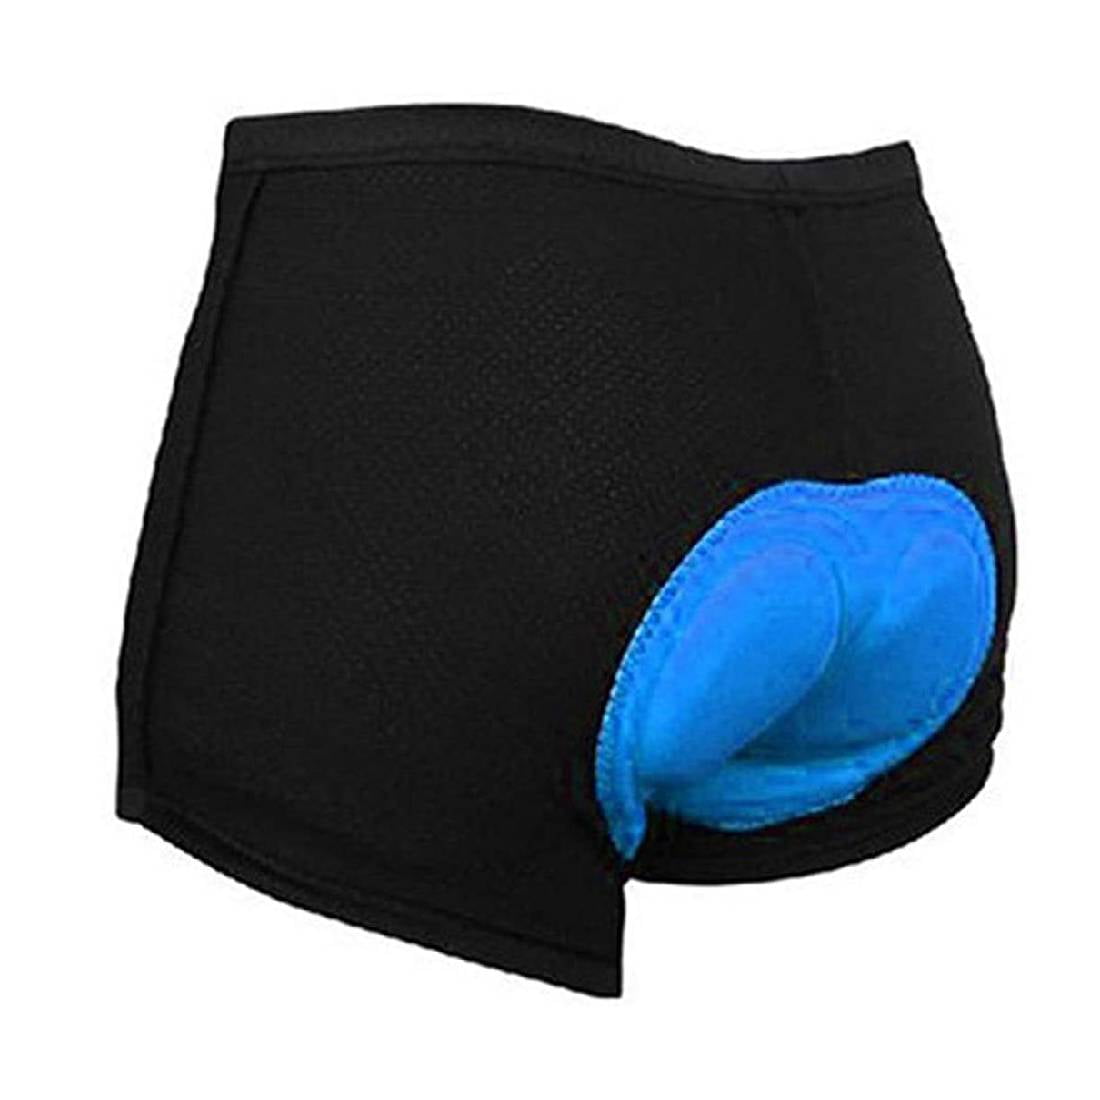 Details about   Padded Cycling Shorts Underwear Bicycle Mountain Bike Sport Unisex New 